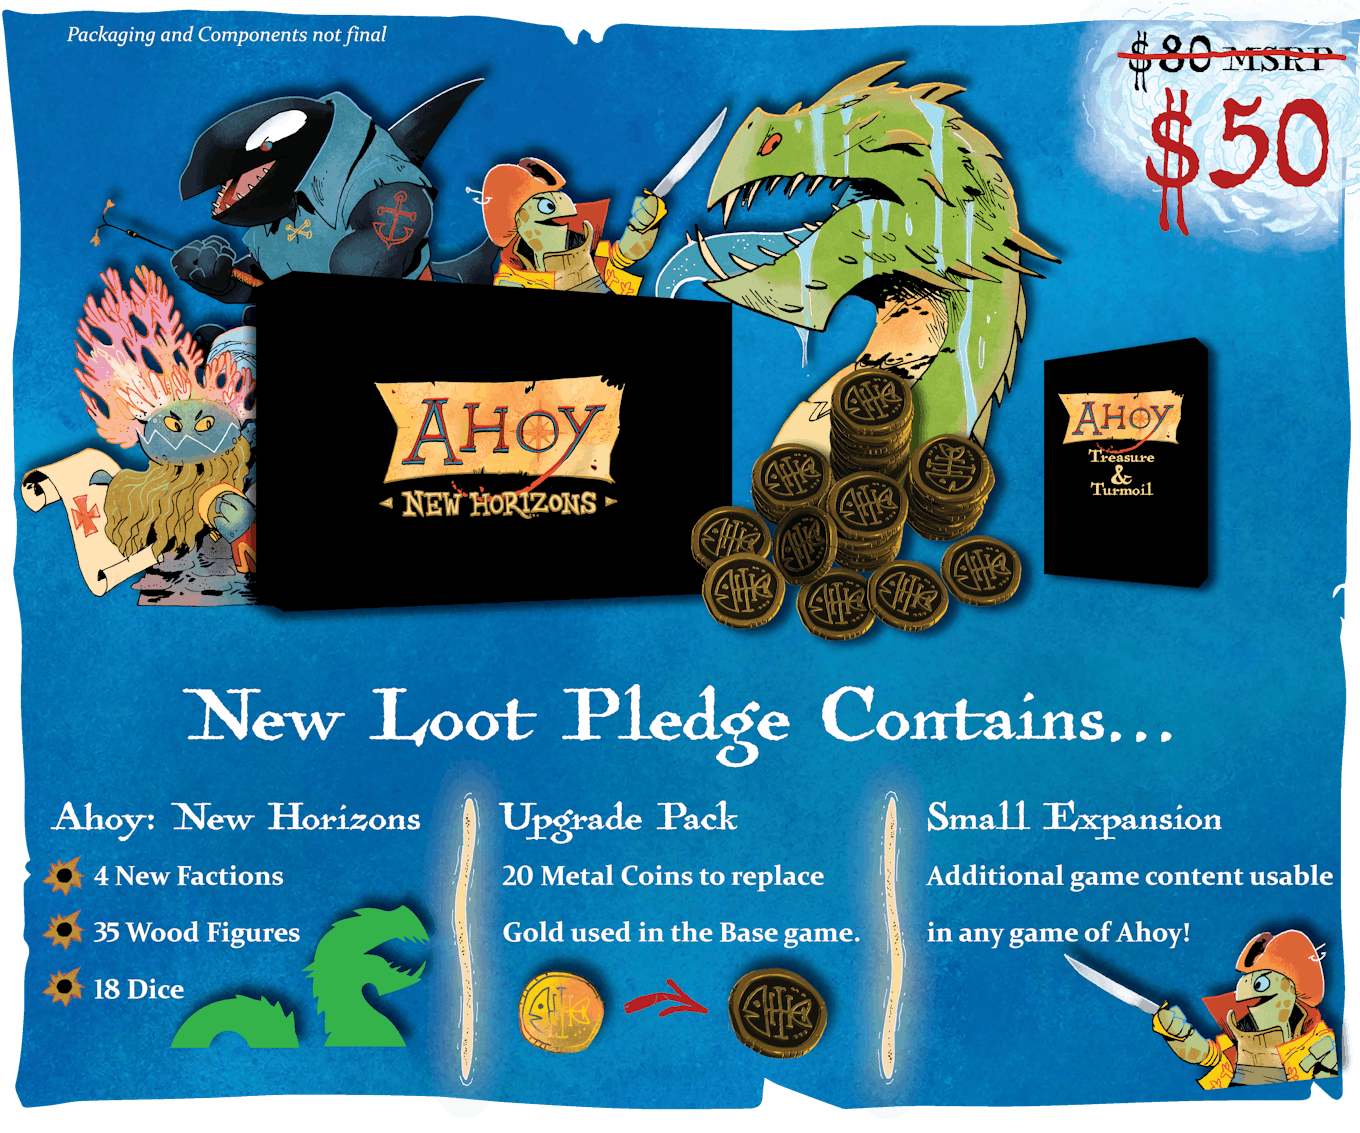  The New Loot pledge level includes:  4 new factions, including: The Blackfish Brigade The Shellfire Rebellion The Leviathan The Coral Cap Pirates. Deluxe metal coins to replace the cardboard coins in the Ahoy base game. A mini expansion of brand new content. About $80 of retail value for just $50.